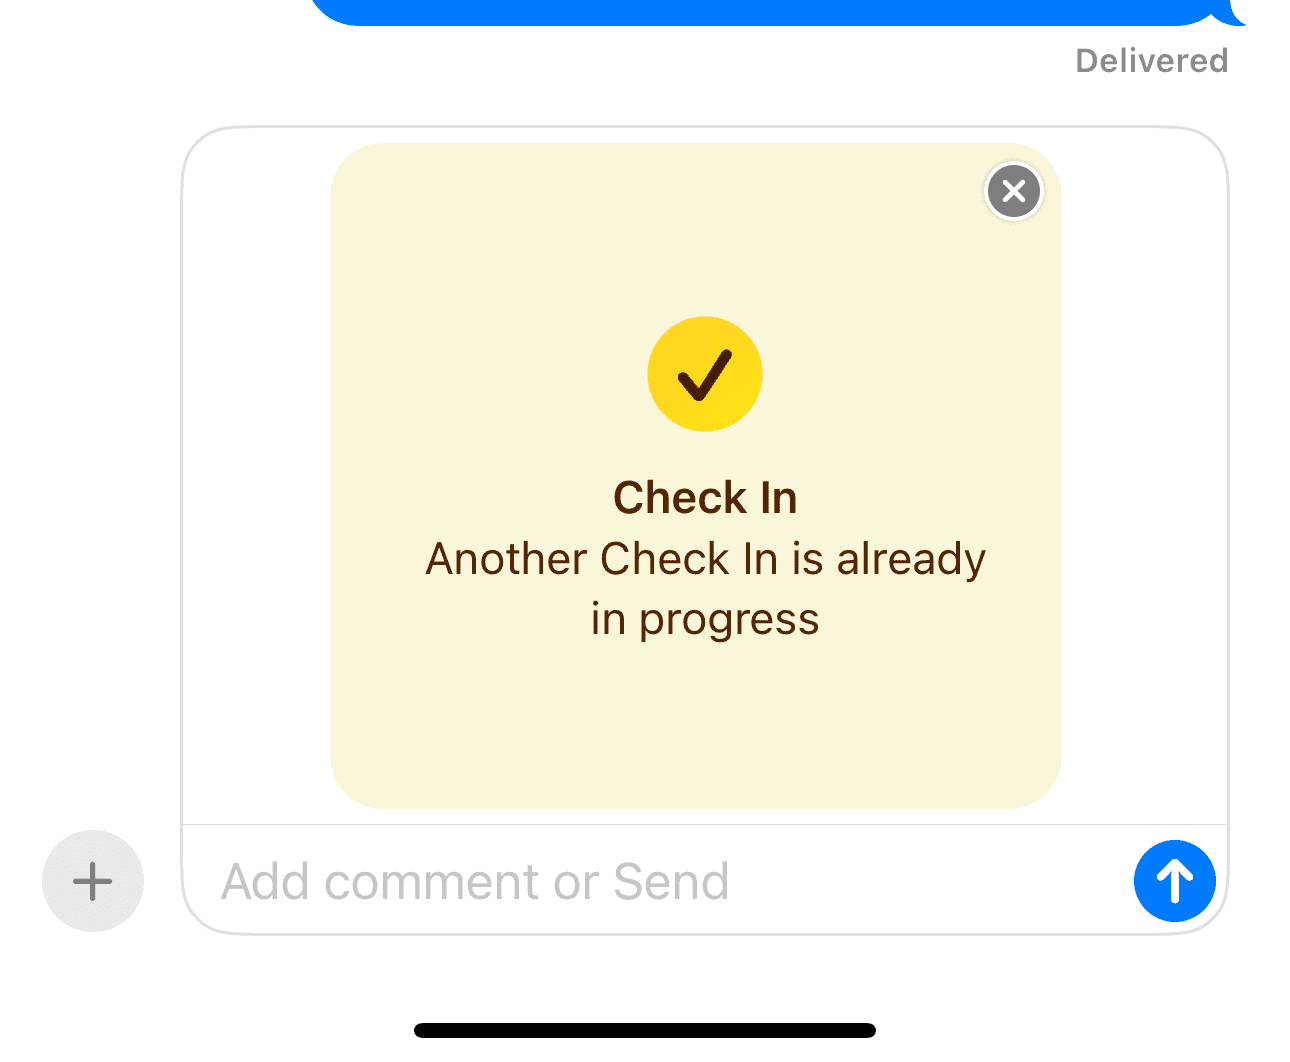 Another Check In is already in progress message on iPhone